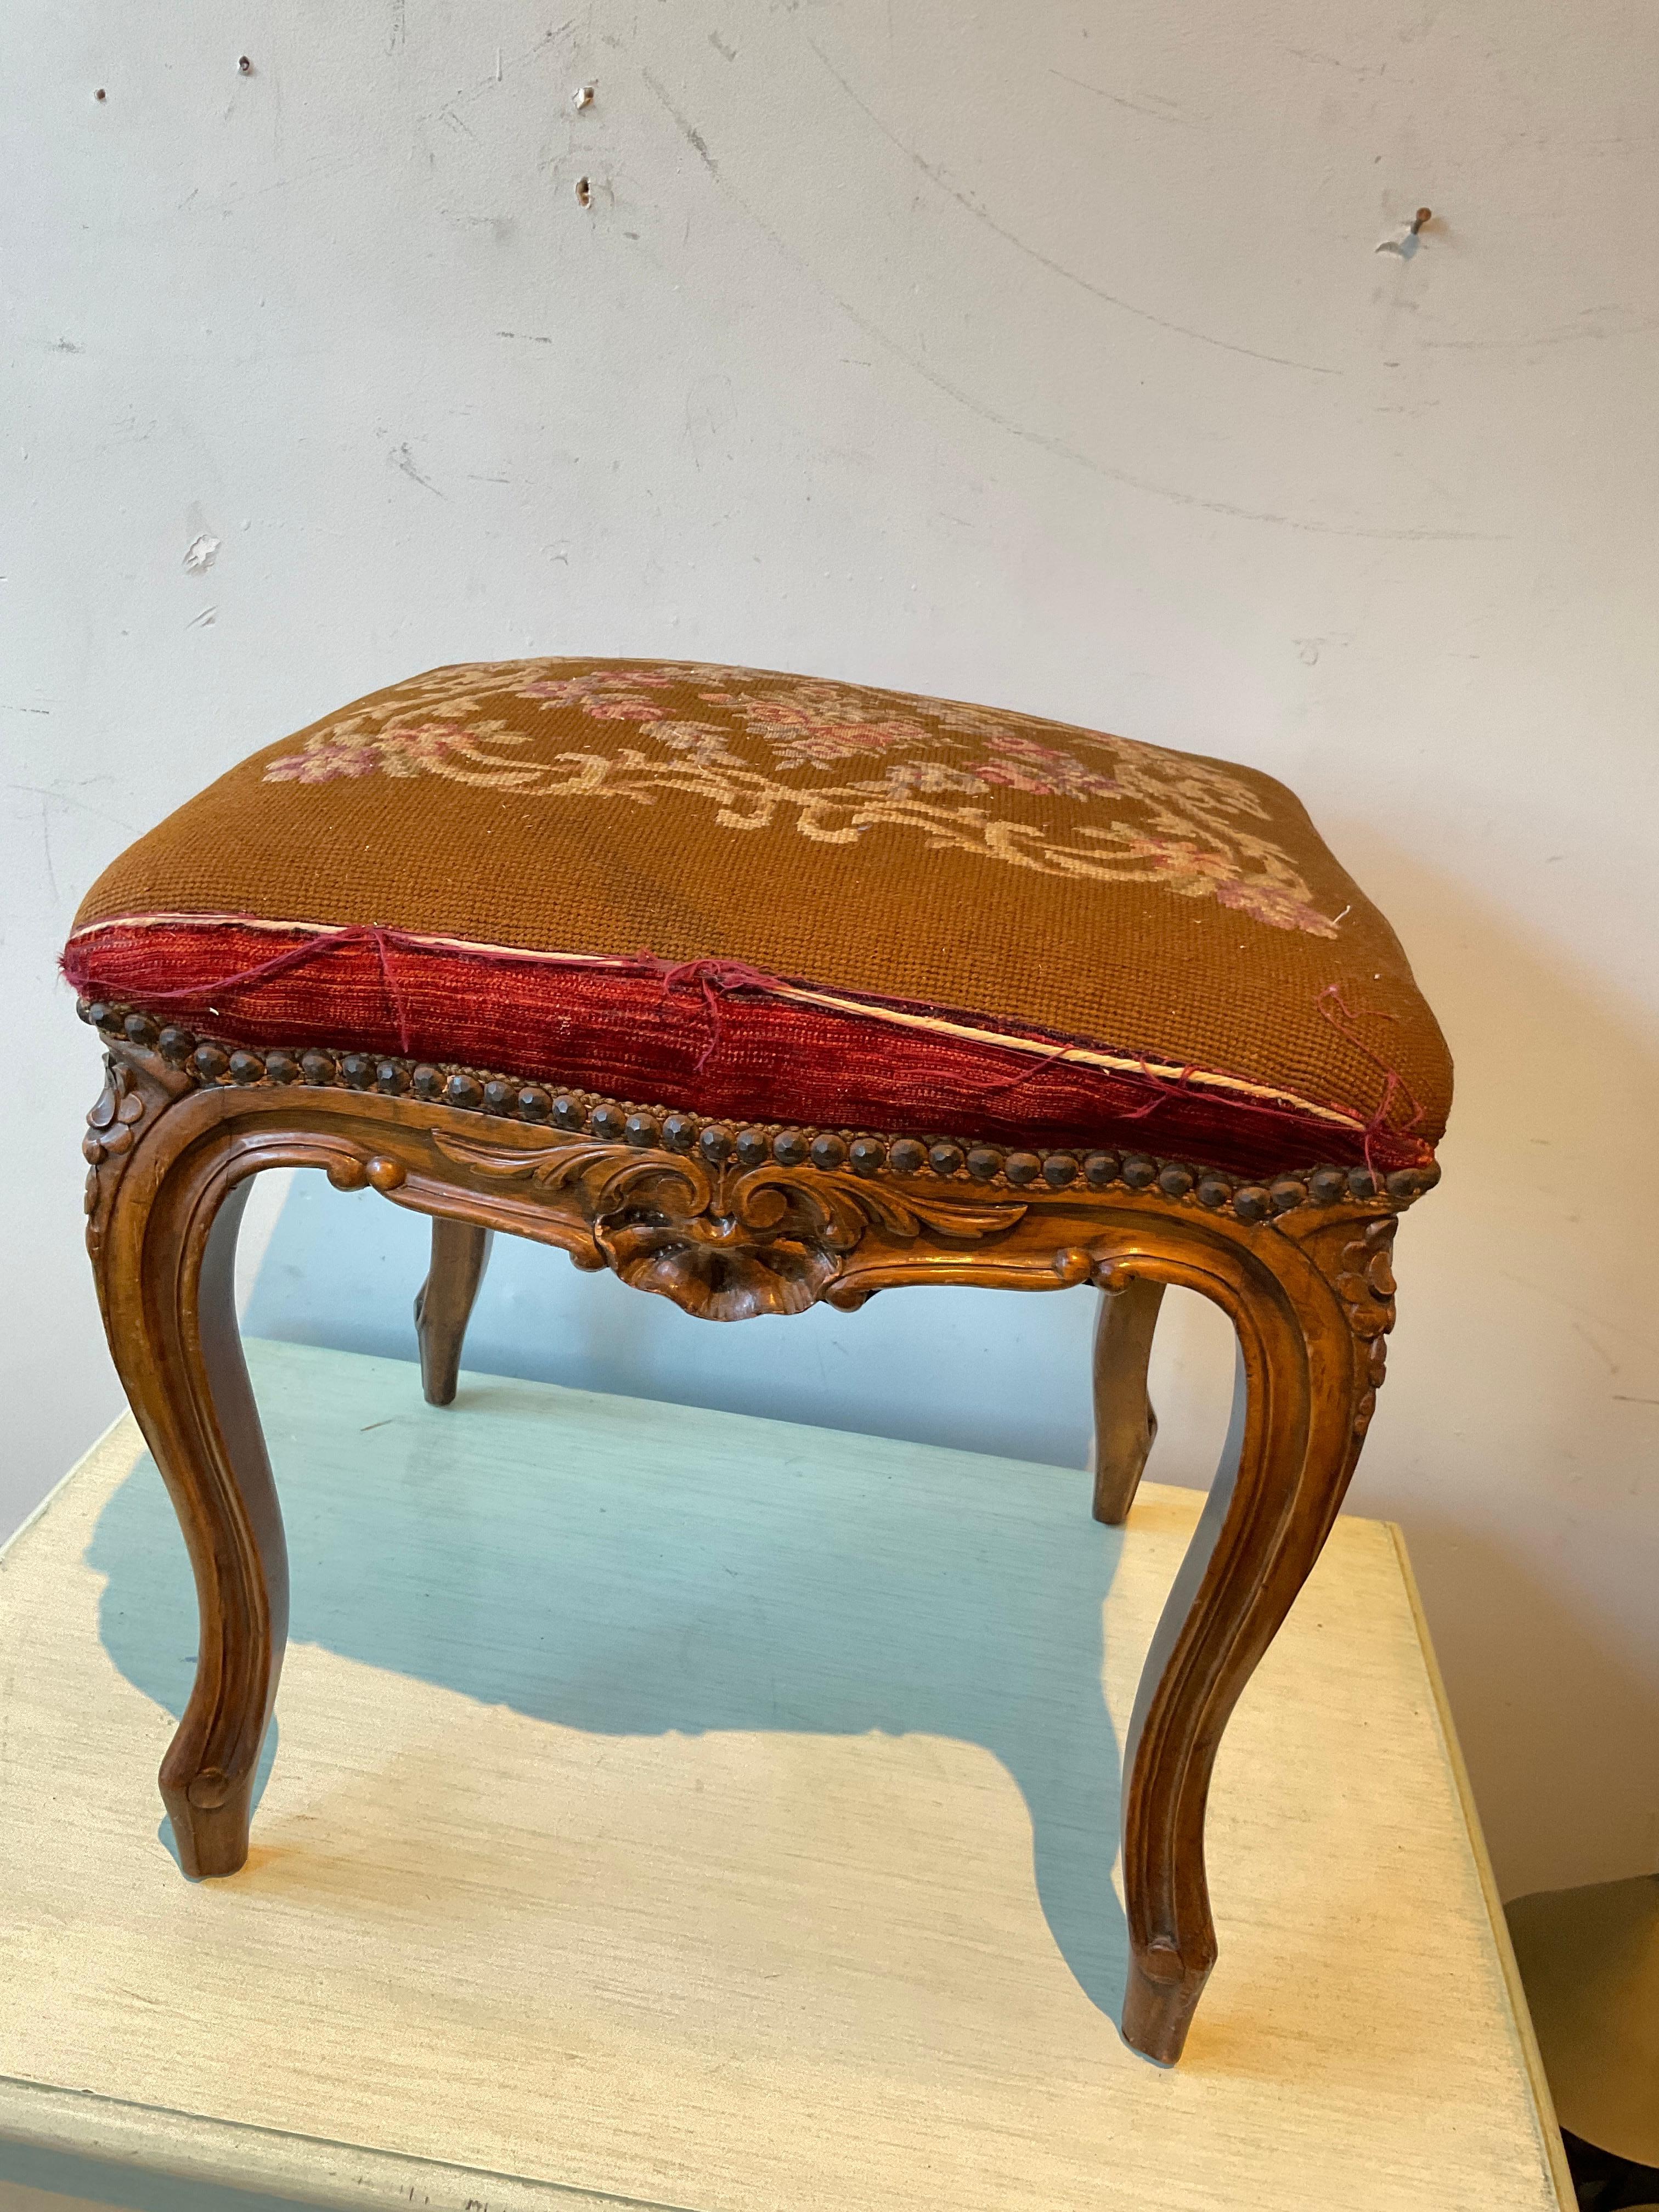 1930s French hand carved wood footstool. 
Needs reupholstering. Some grey paint spots on leg as shown in pictures.